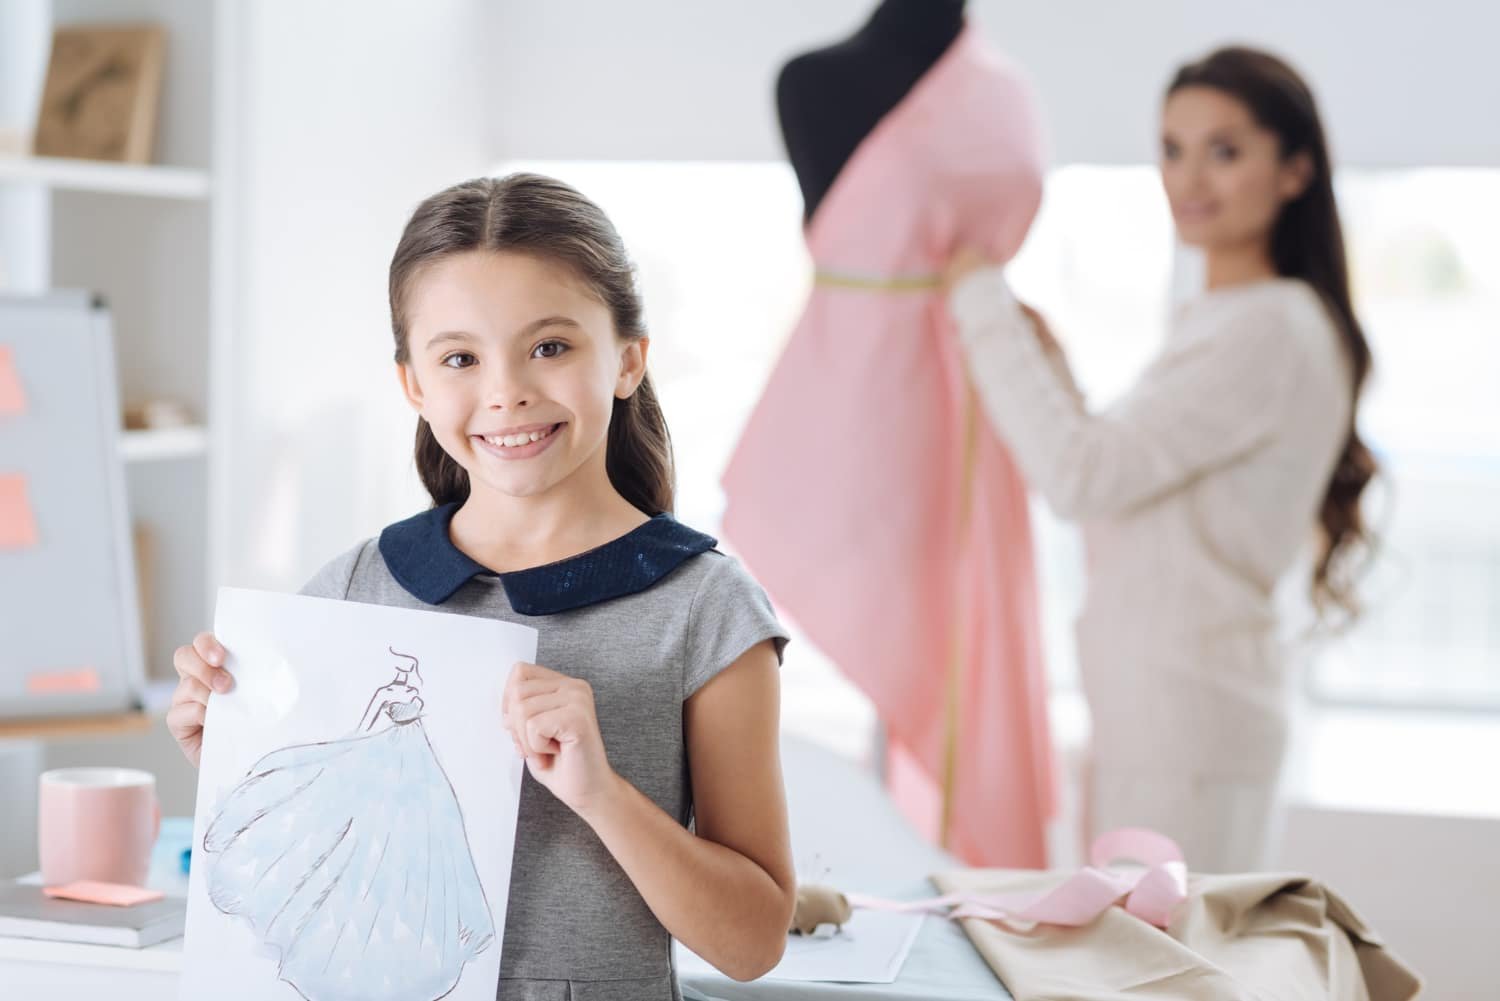 You are currently viewing Childrensalon: Designer Fashion for Children from Newborn to Teens